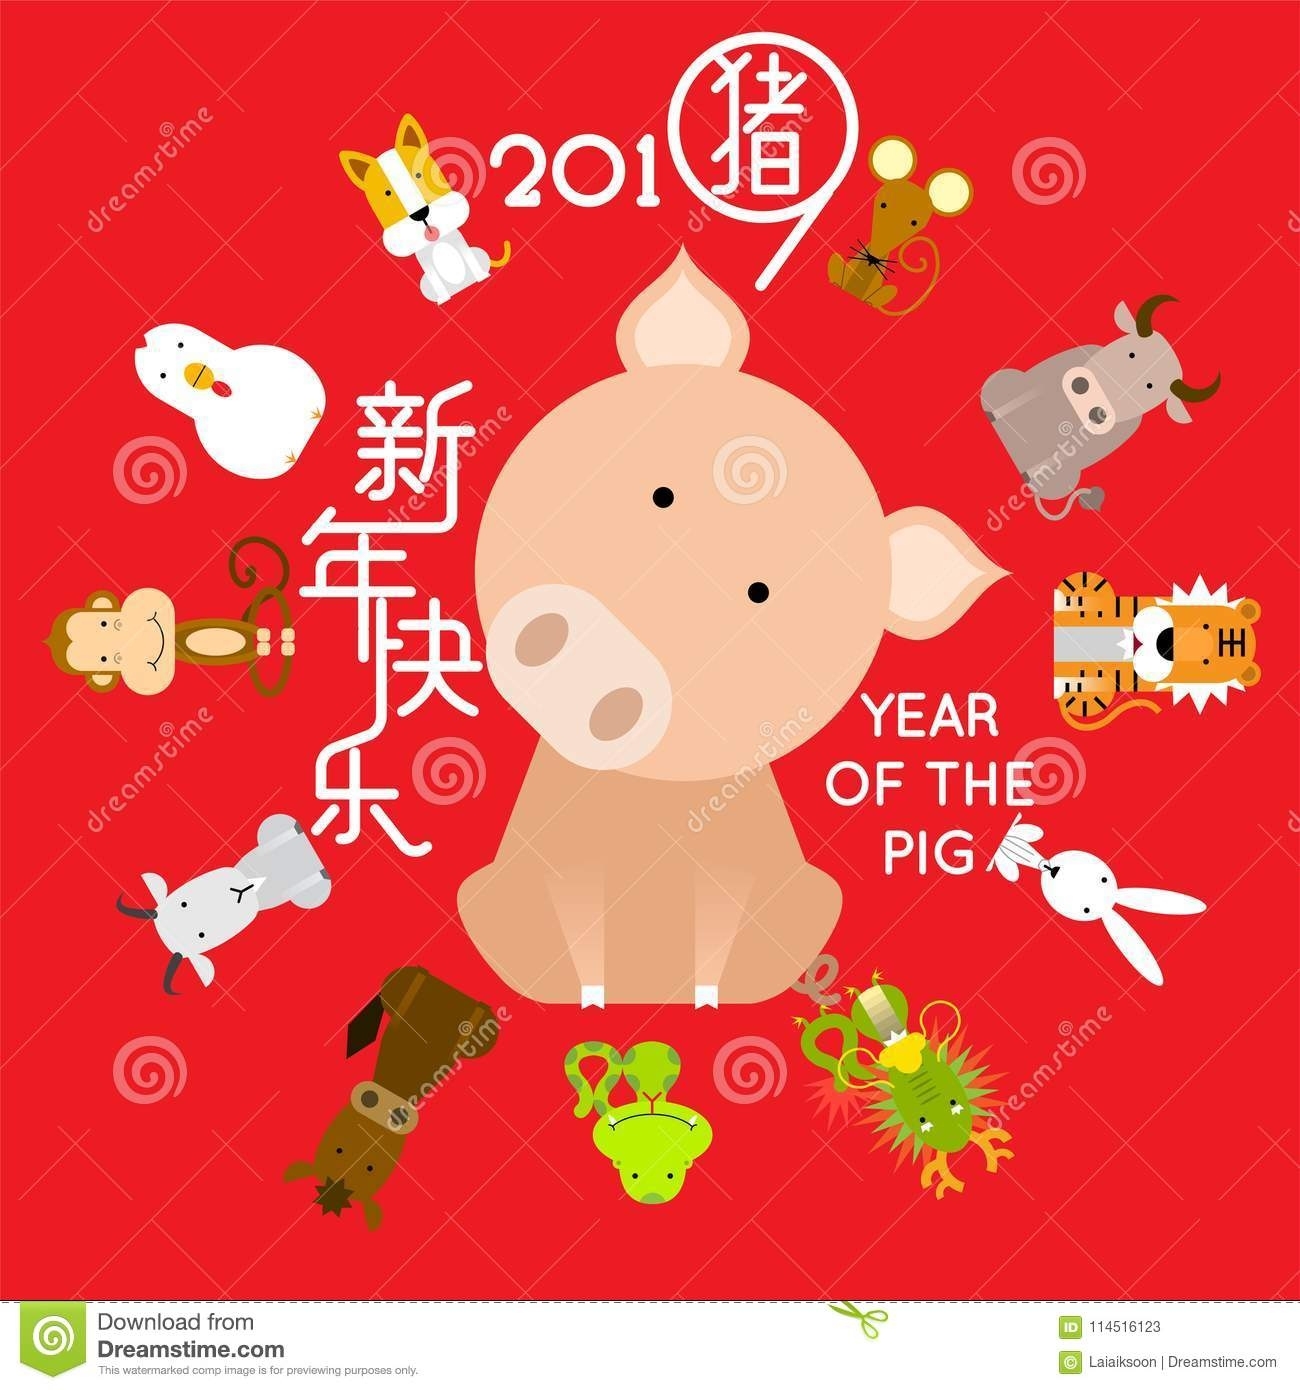 Happy Chinese New Year 2019, Year Of The Pig With 12 Chinese Zodiac Chinese Zodiac Calendar Pig